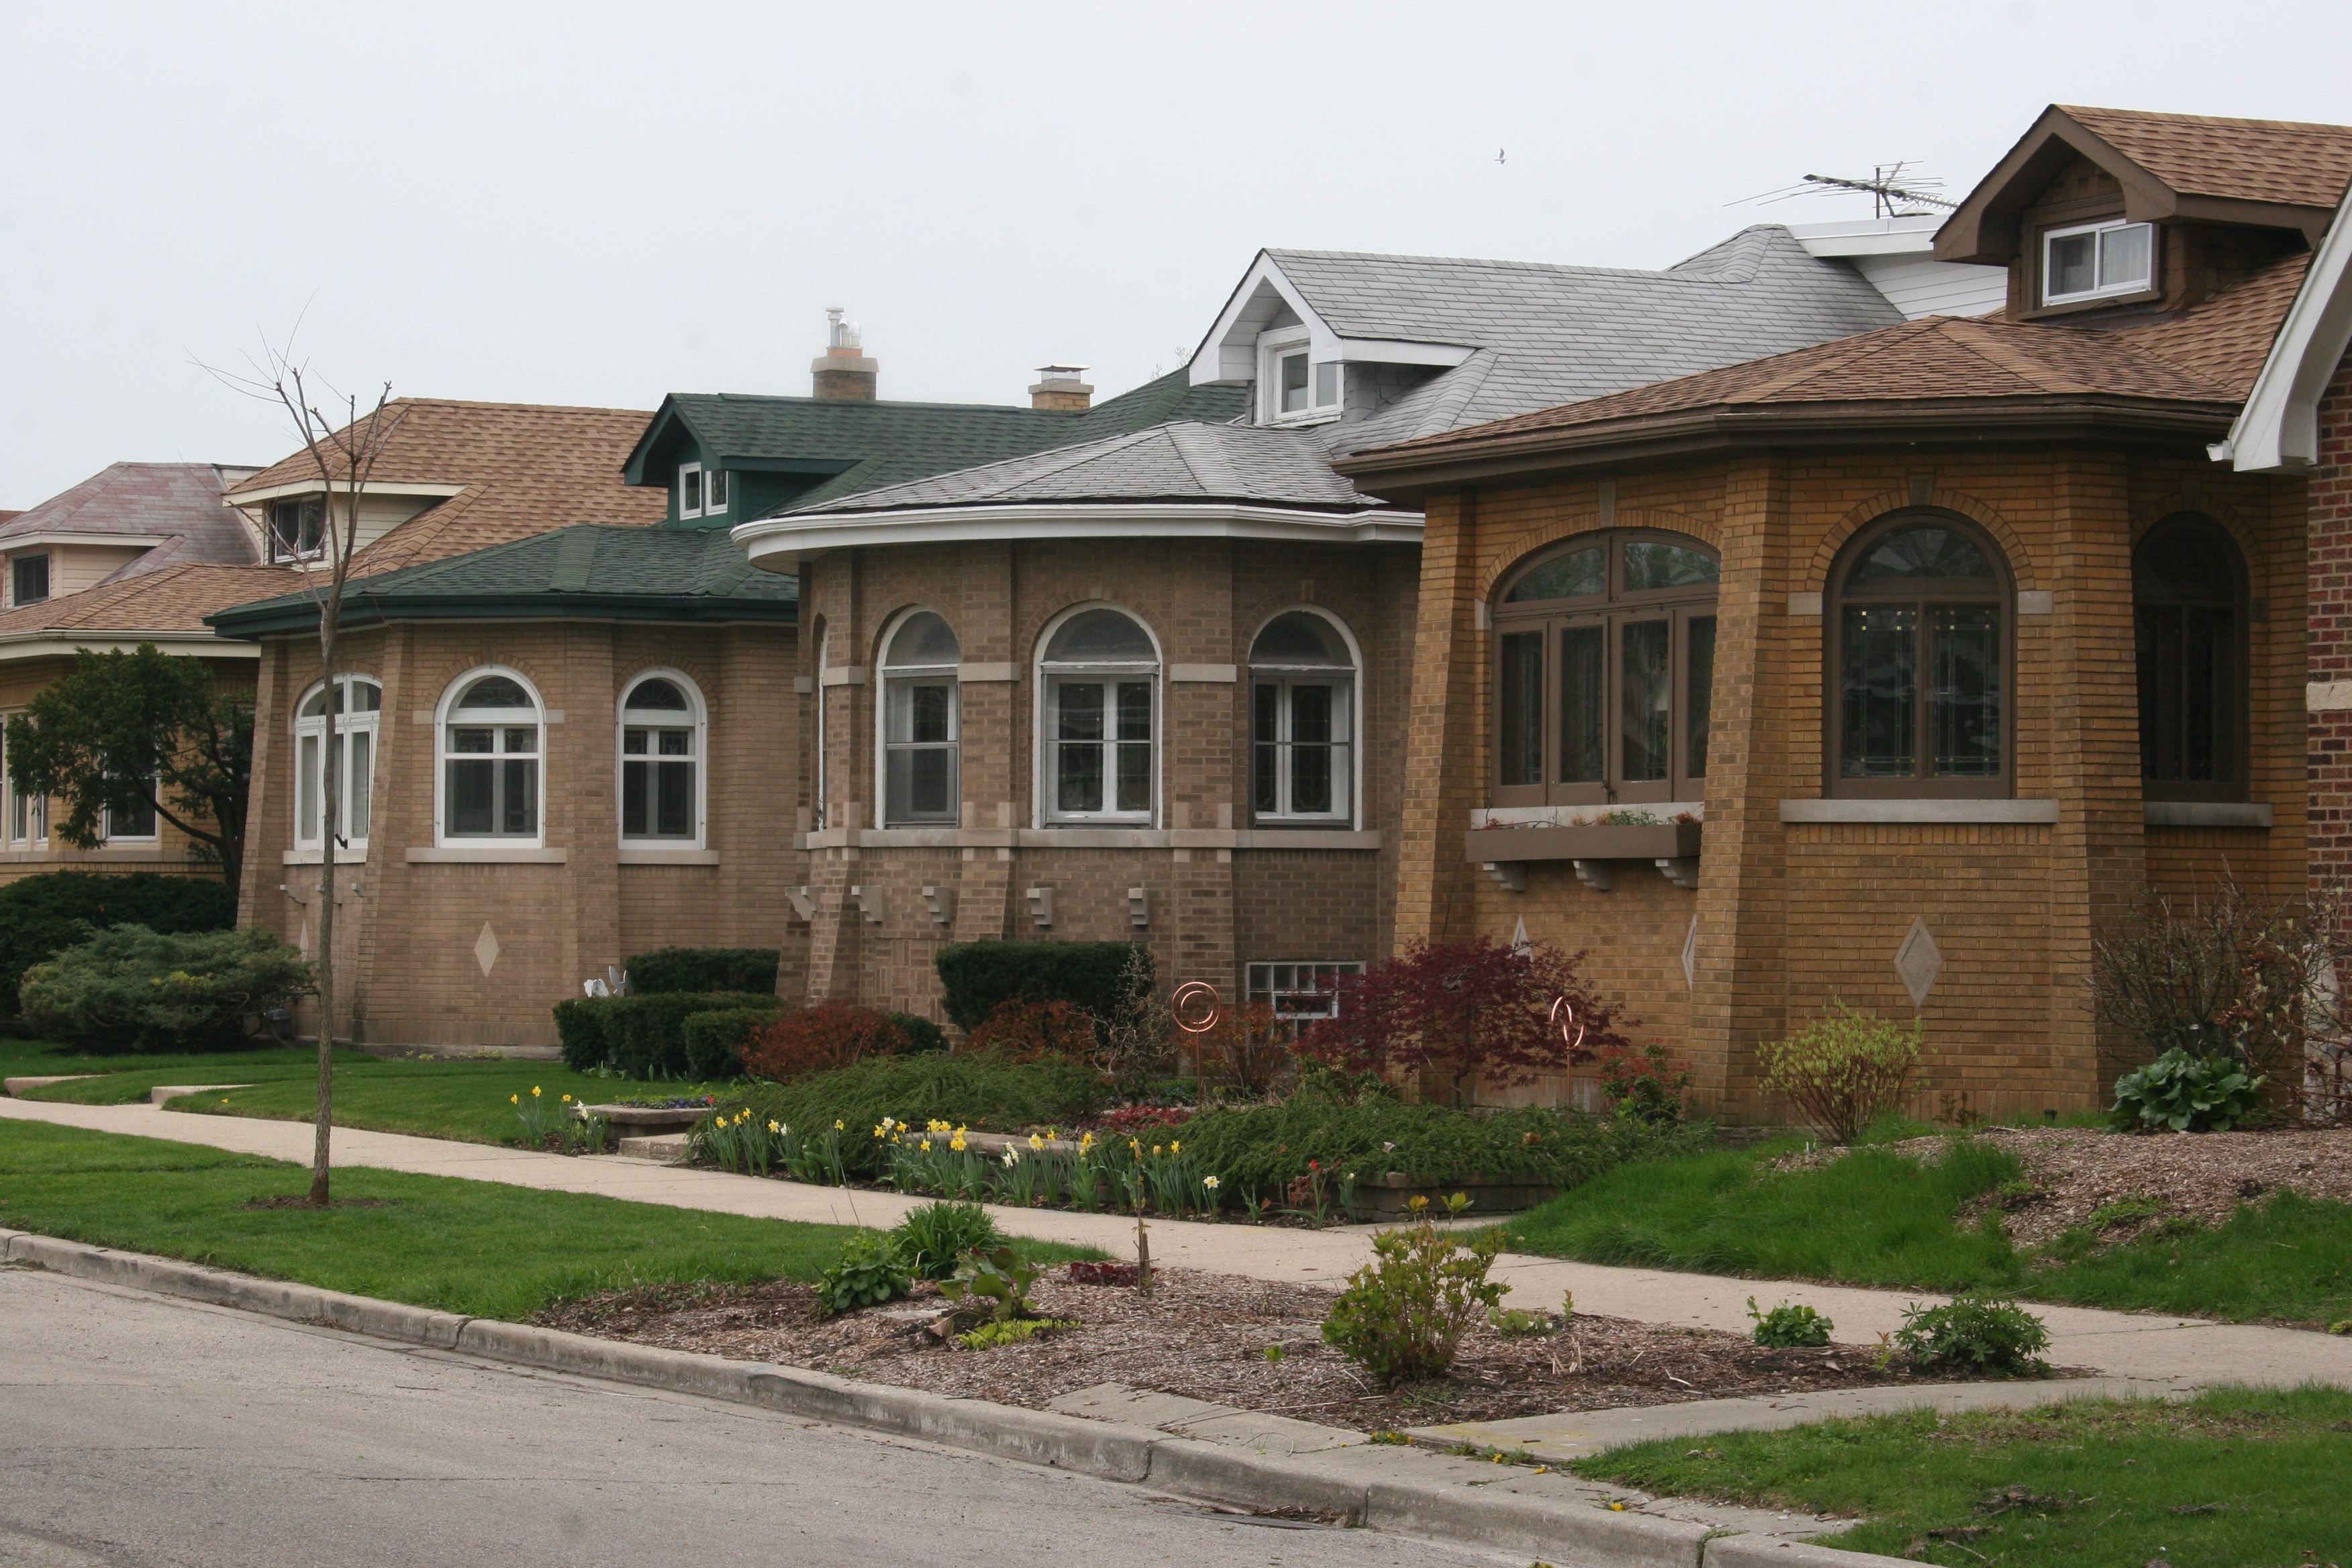 File:Rogers Park Manor Bungalow Historic Ditrict 1.JPG - Wikimedia Commons